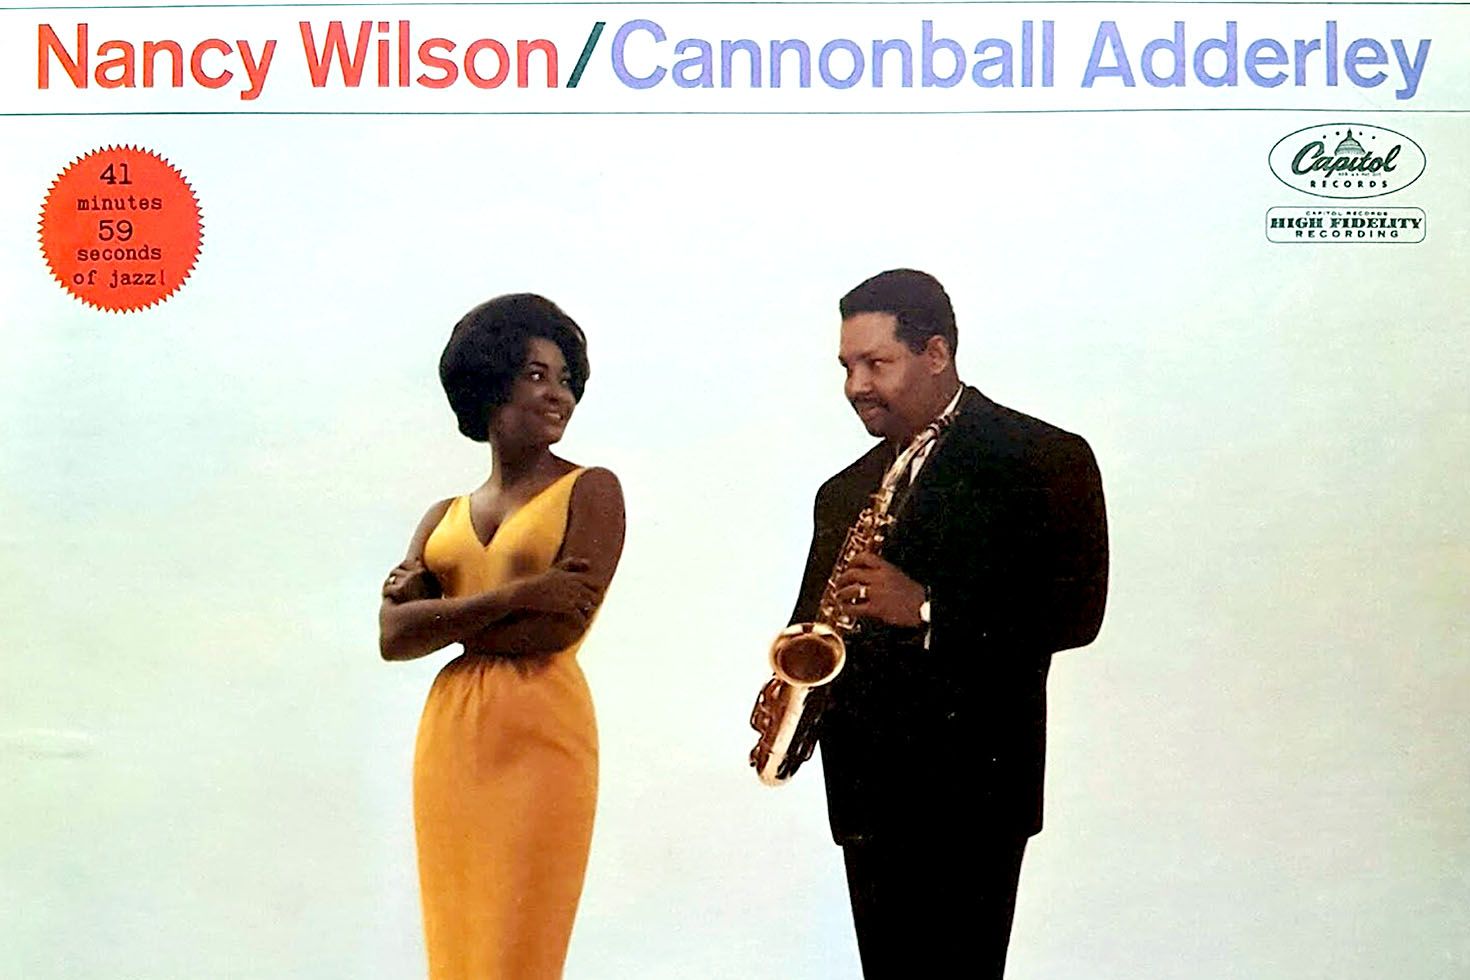 Nancy Wilson and Cannonball Adderley